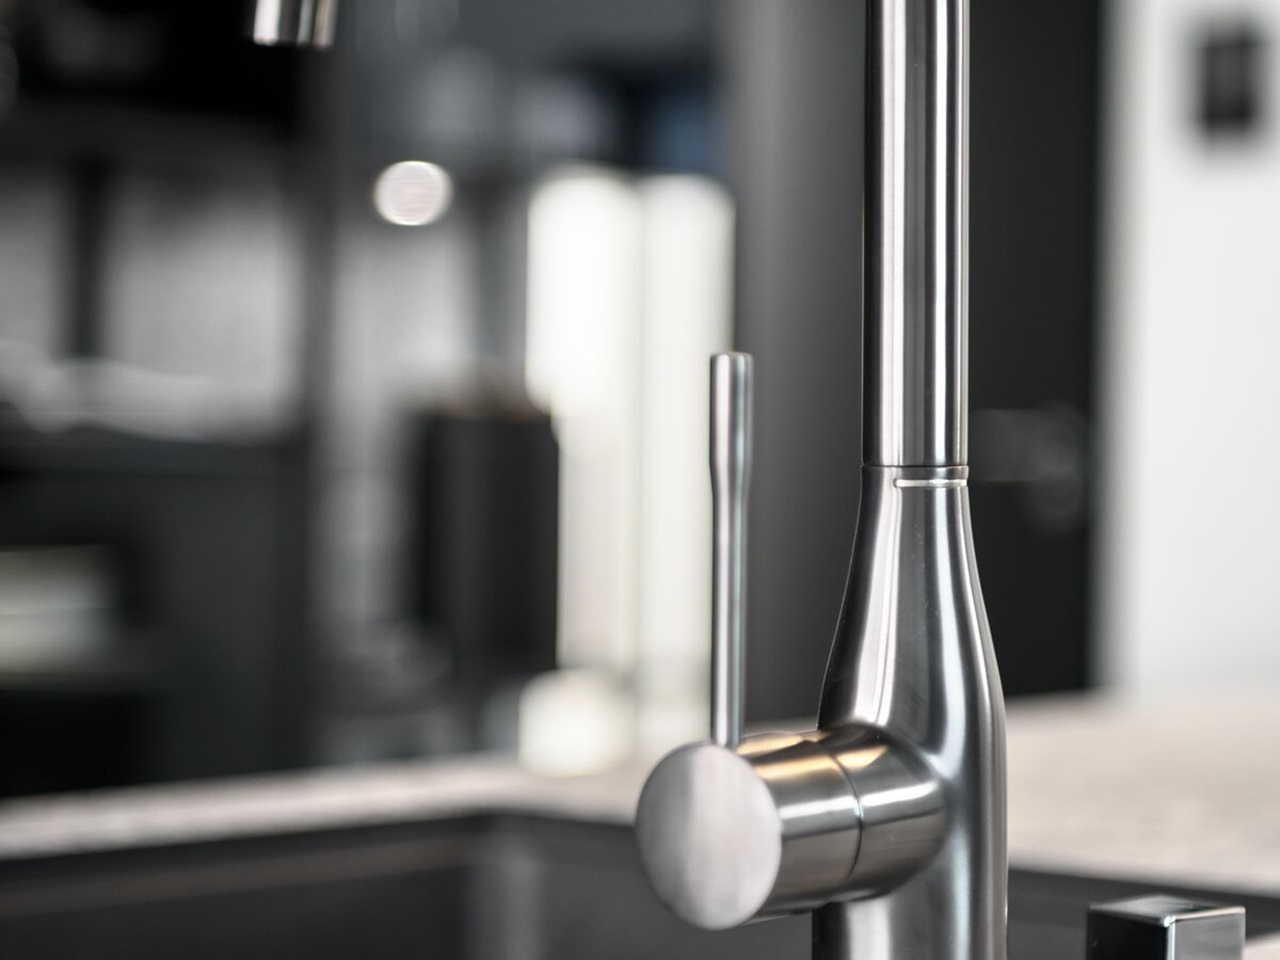 Designer kitchen mixer tap with brushed aluminium appearance